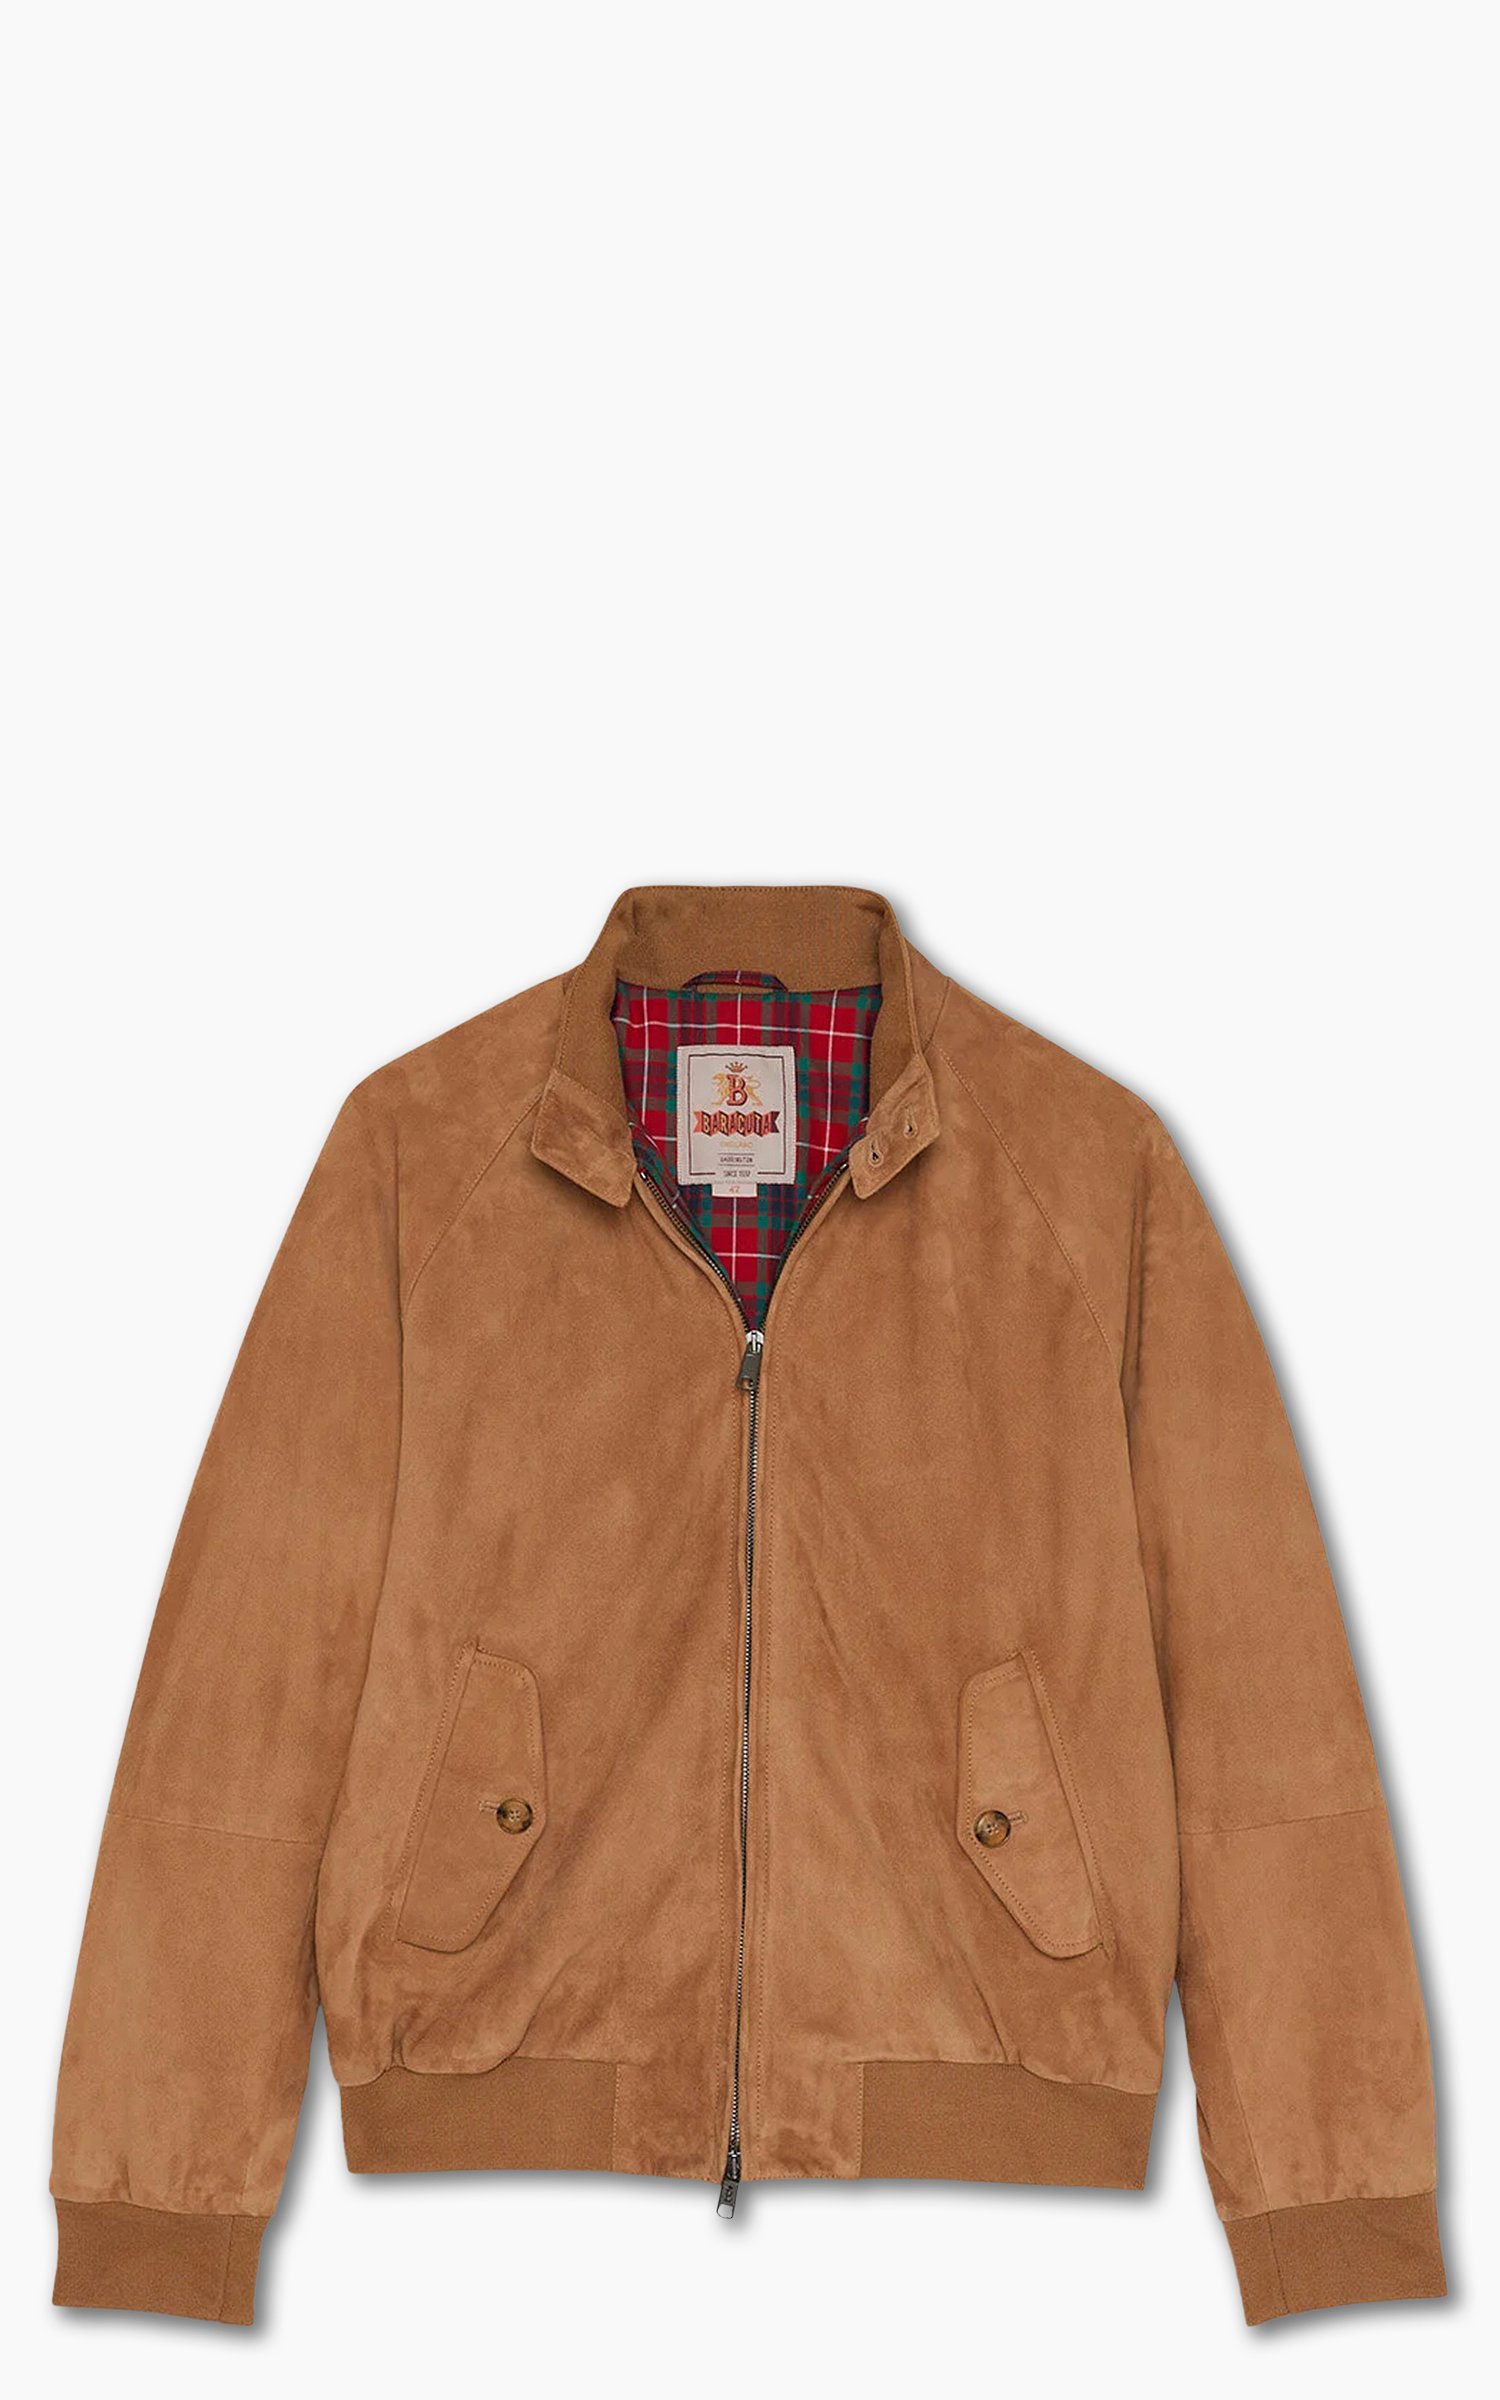 This Fall, Harrington Jackets Are Going Rogue